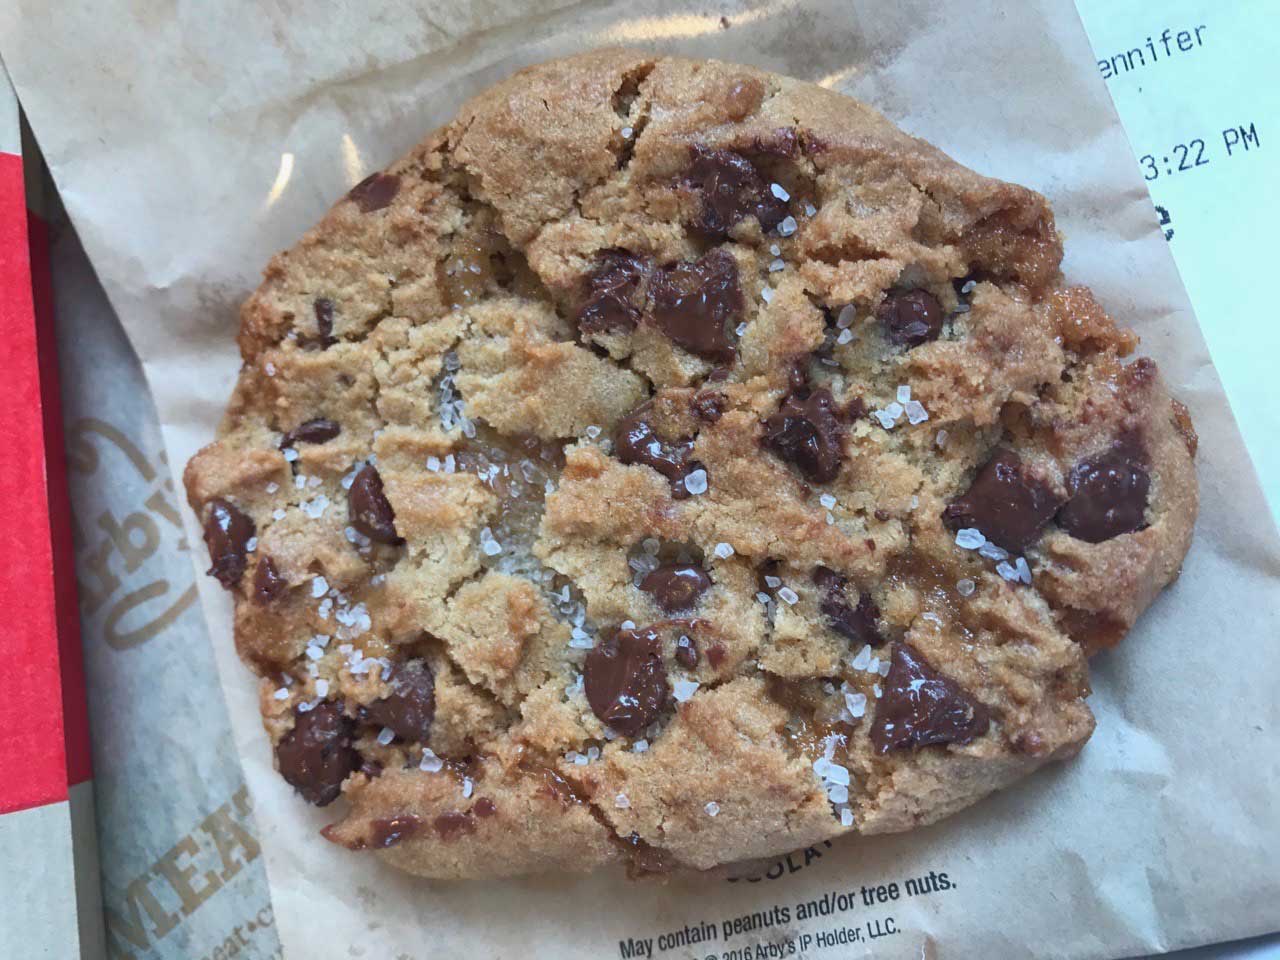 Arby's cookie